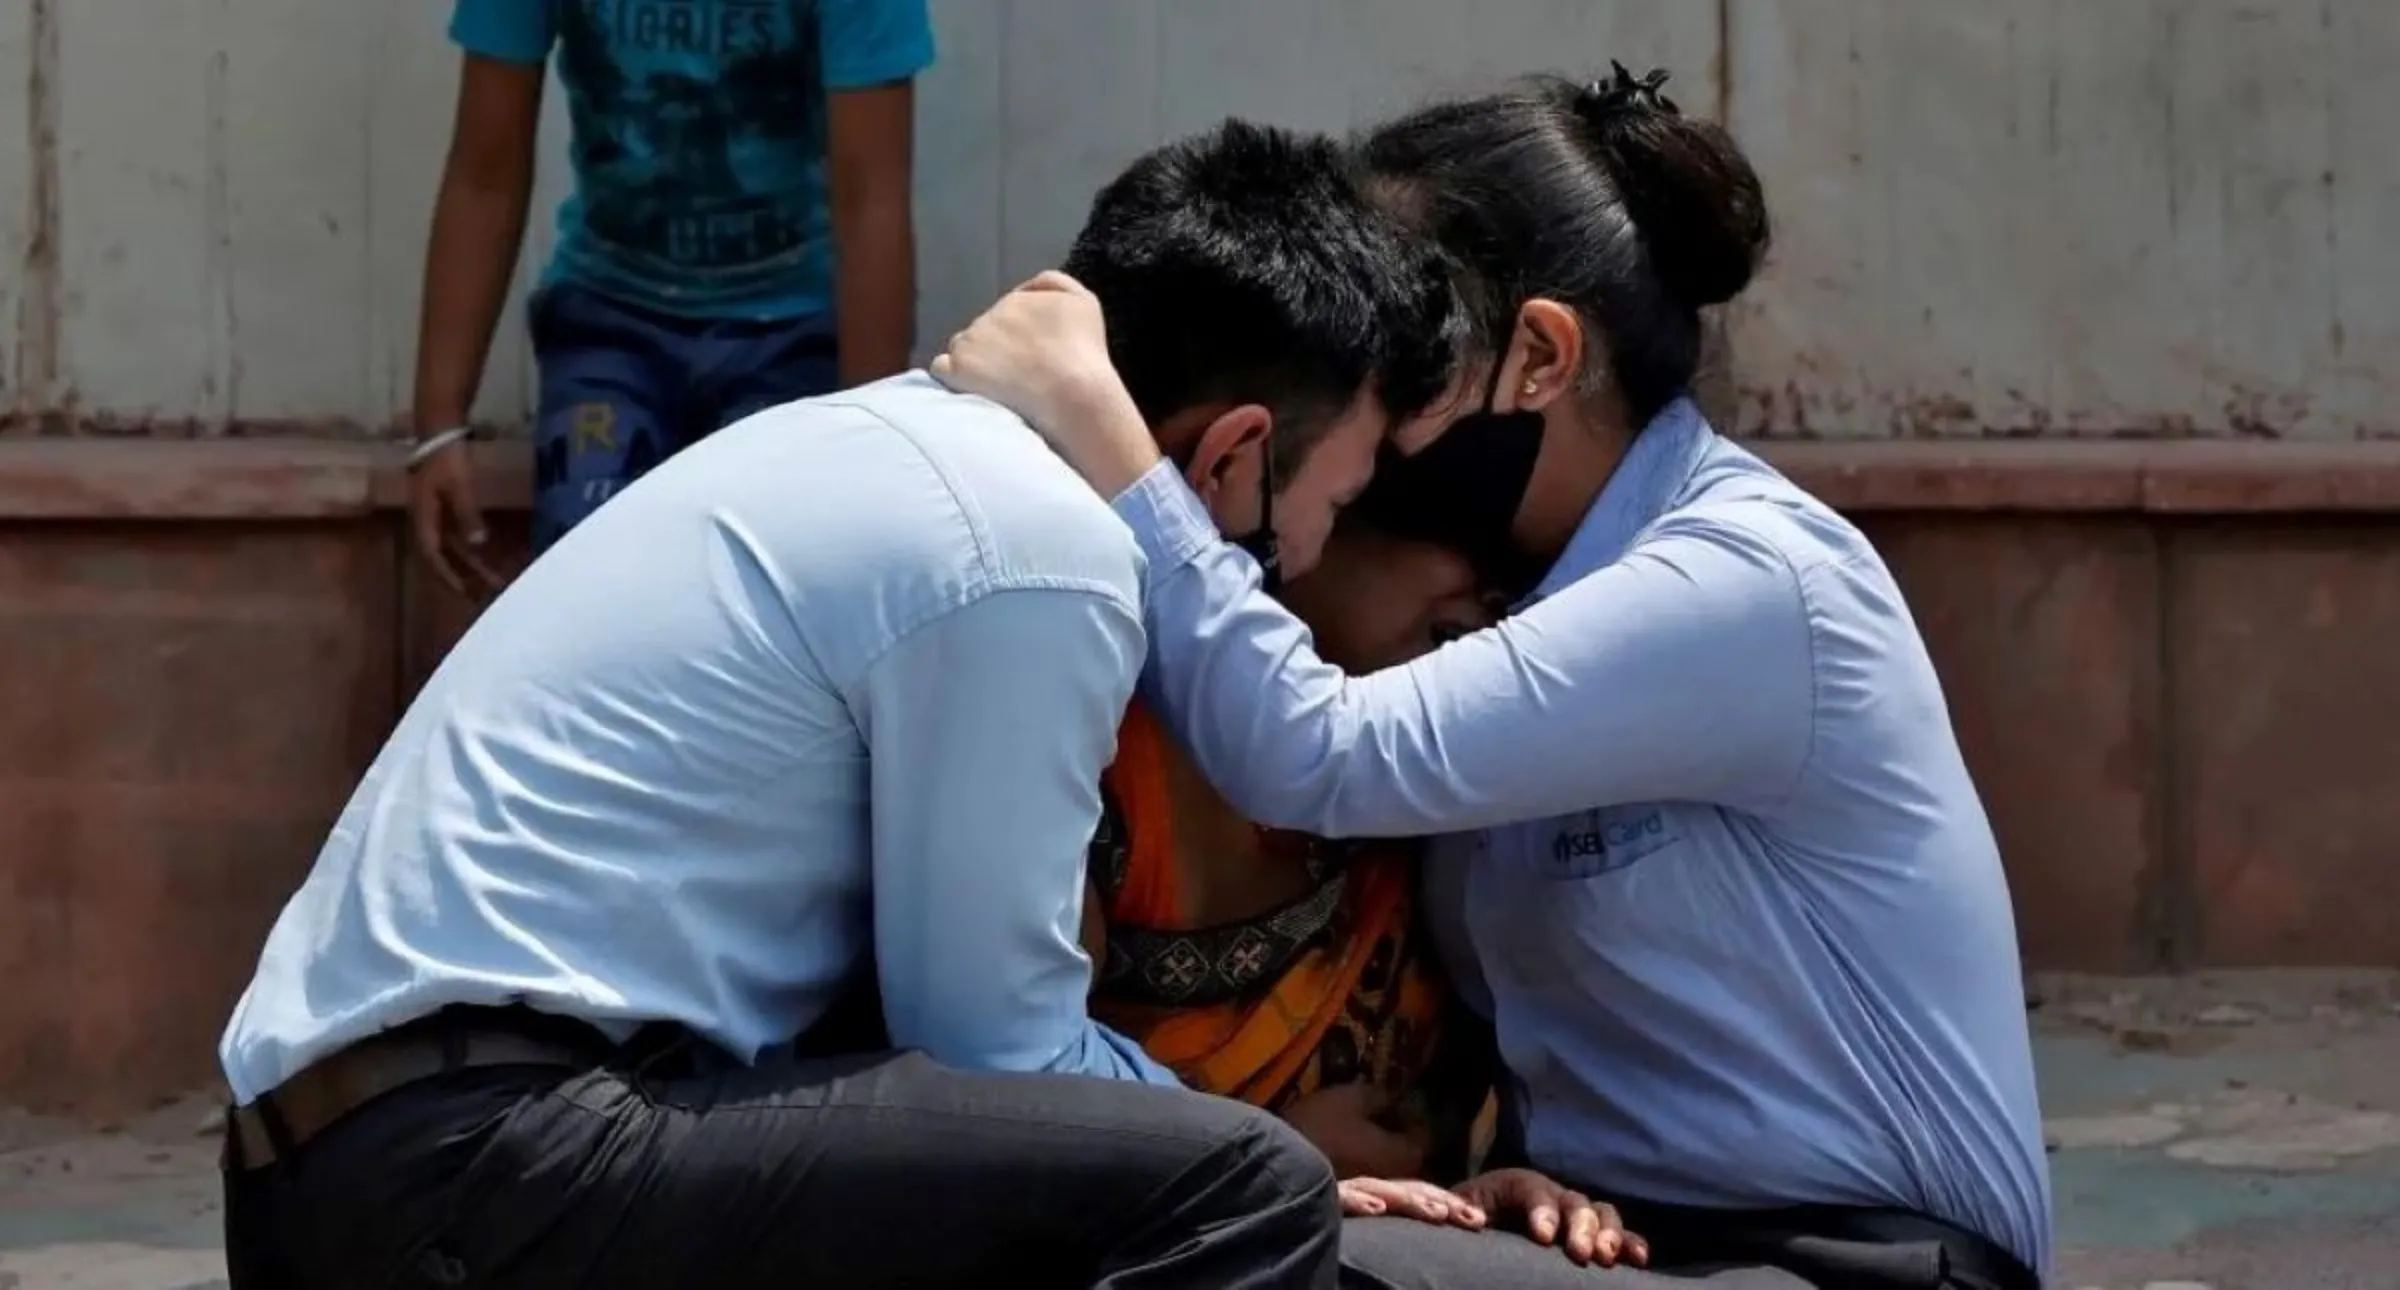 A woman is consoled by her children after her husband died from complications related to the coronavirus disease (COVID-19) outside a mortuary of a COVID-19 hospital in New Delhi, India, April 15, 2021. REUTERS/Danish Siddiqui